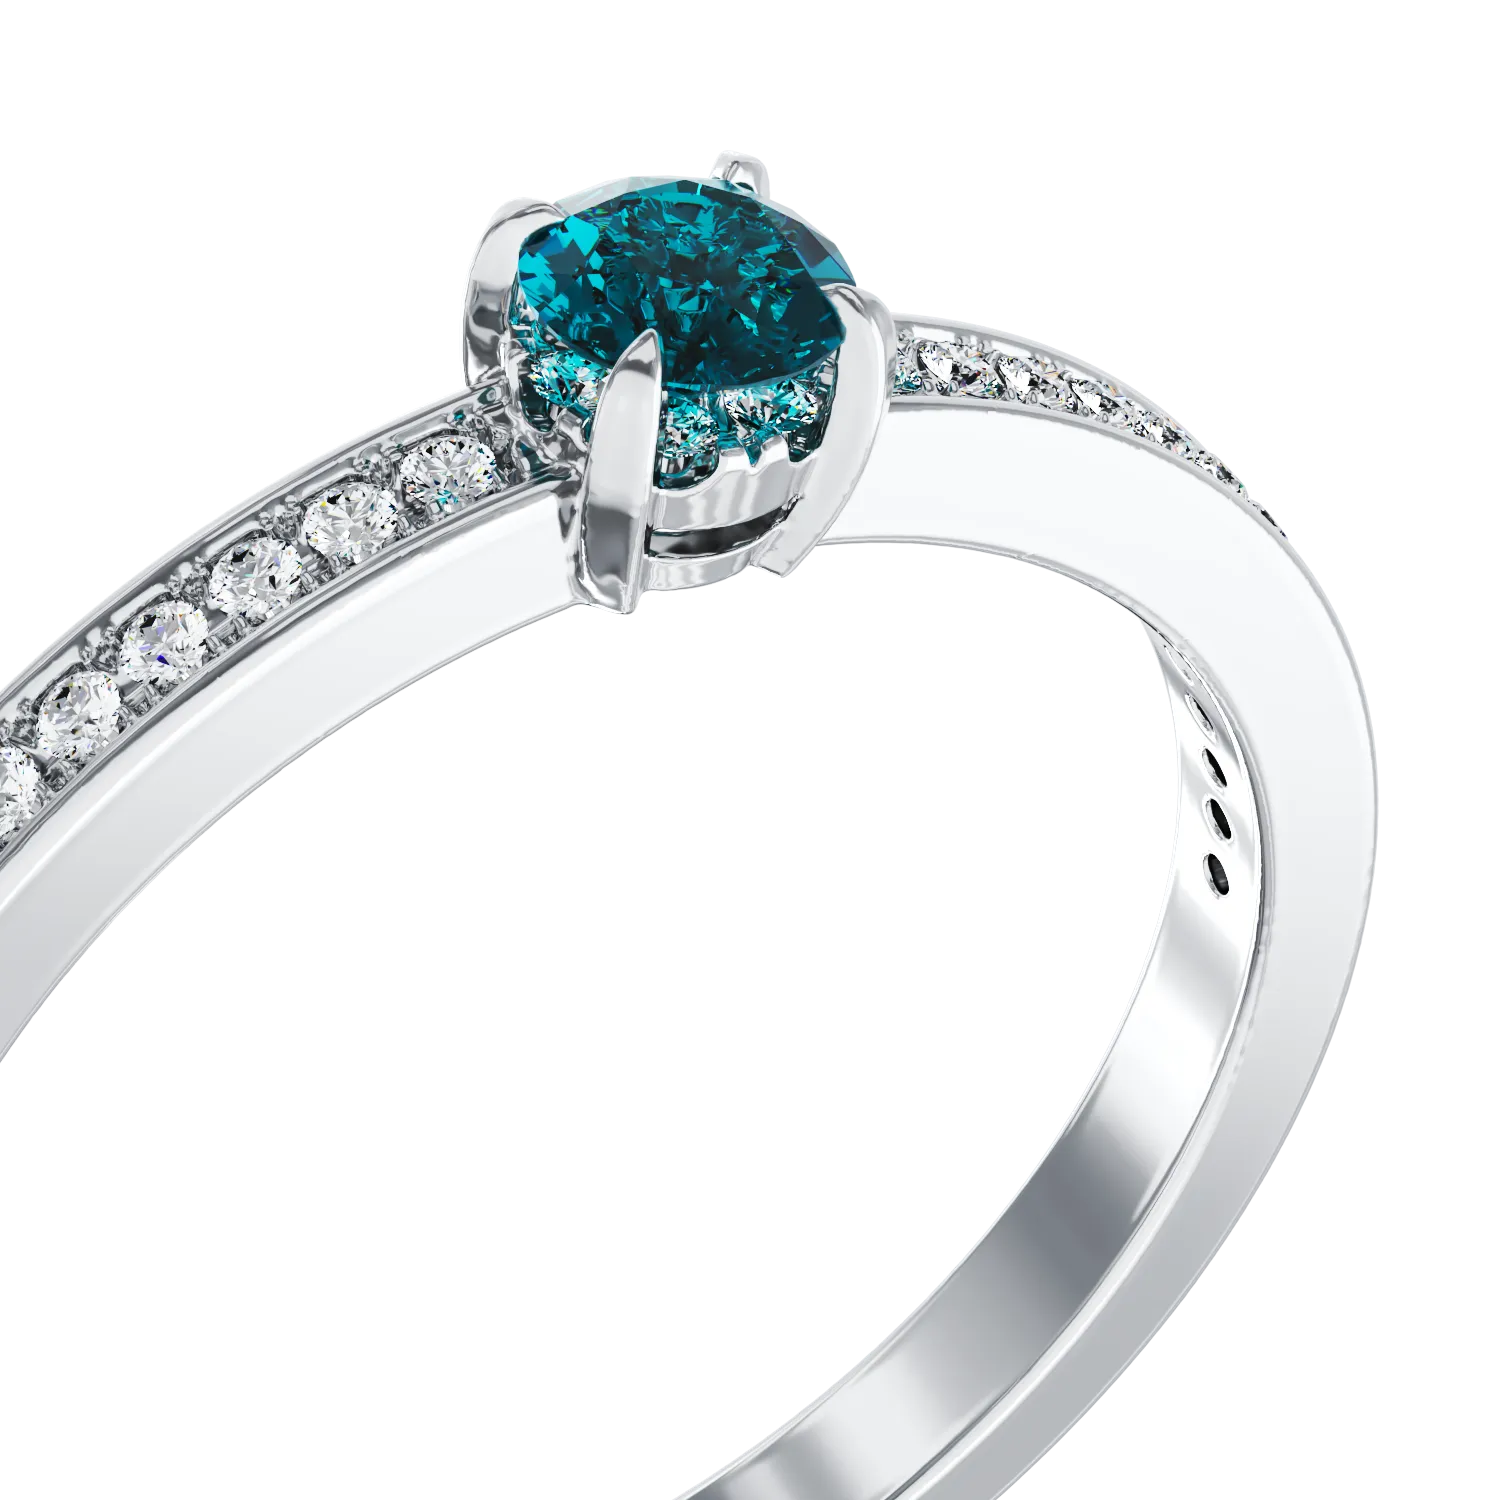 18K white gold engagement ring with 0.21ct blue diamond and 0.16ct Clear diamonds